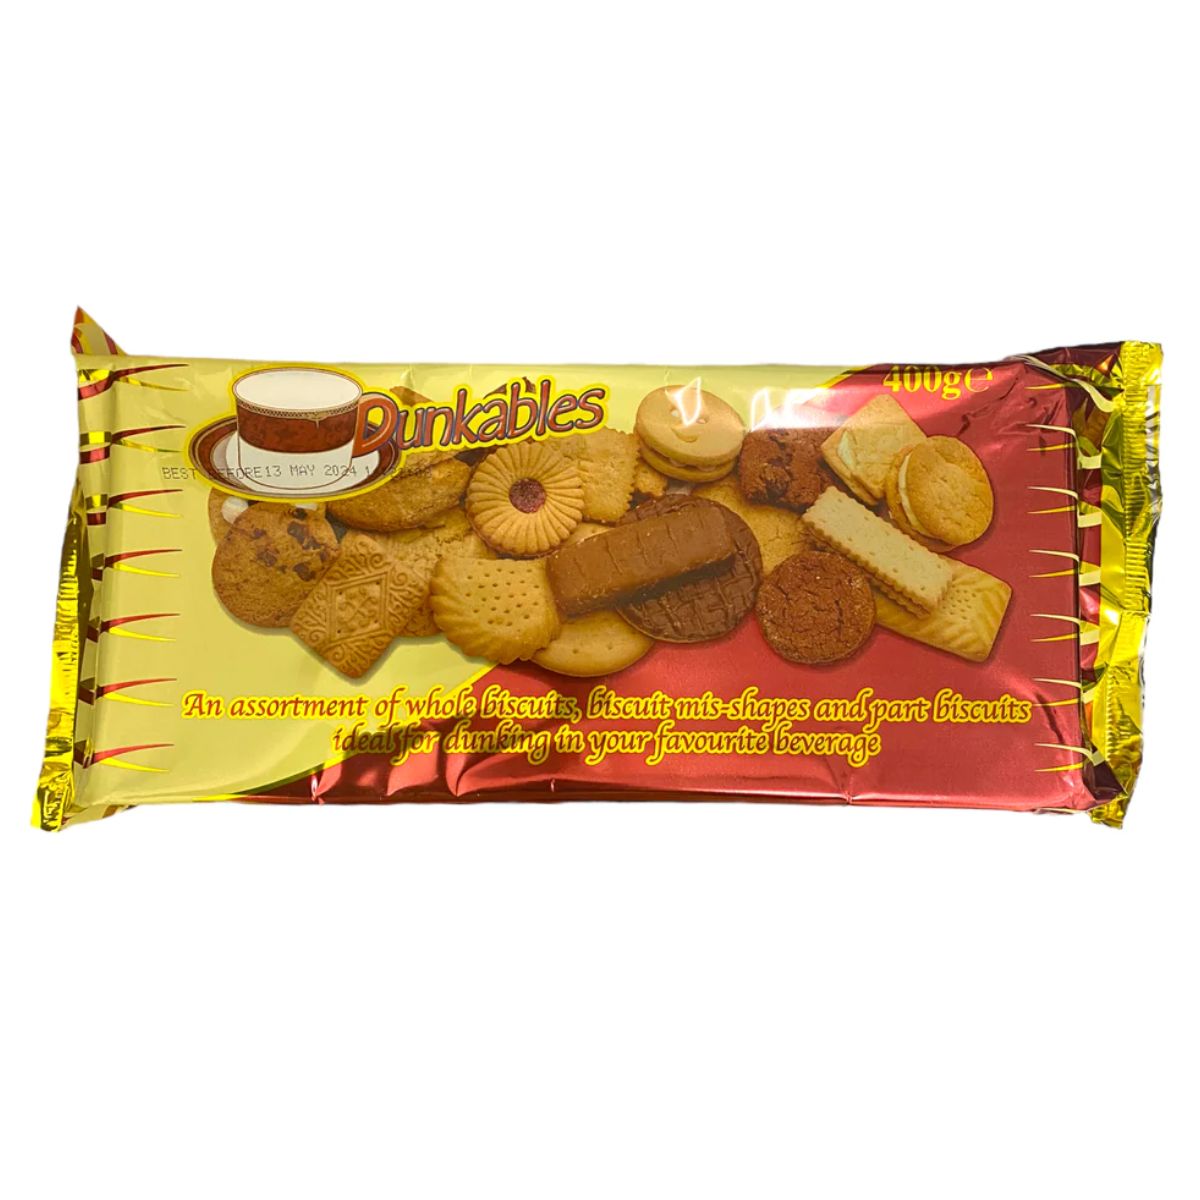 A package of Dunkables - Biscuit Assortment - 400g with a cup of coffee.